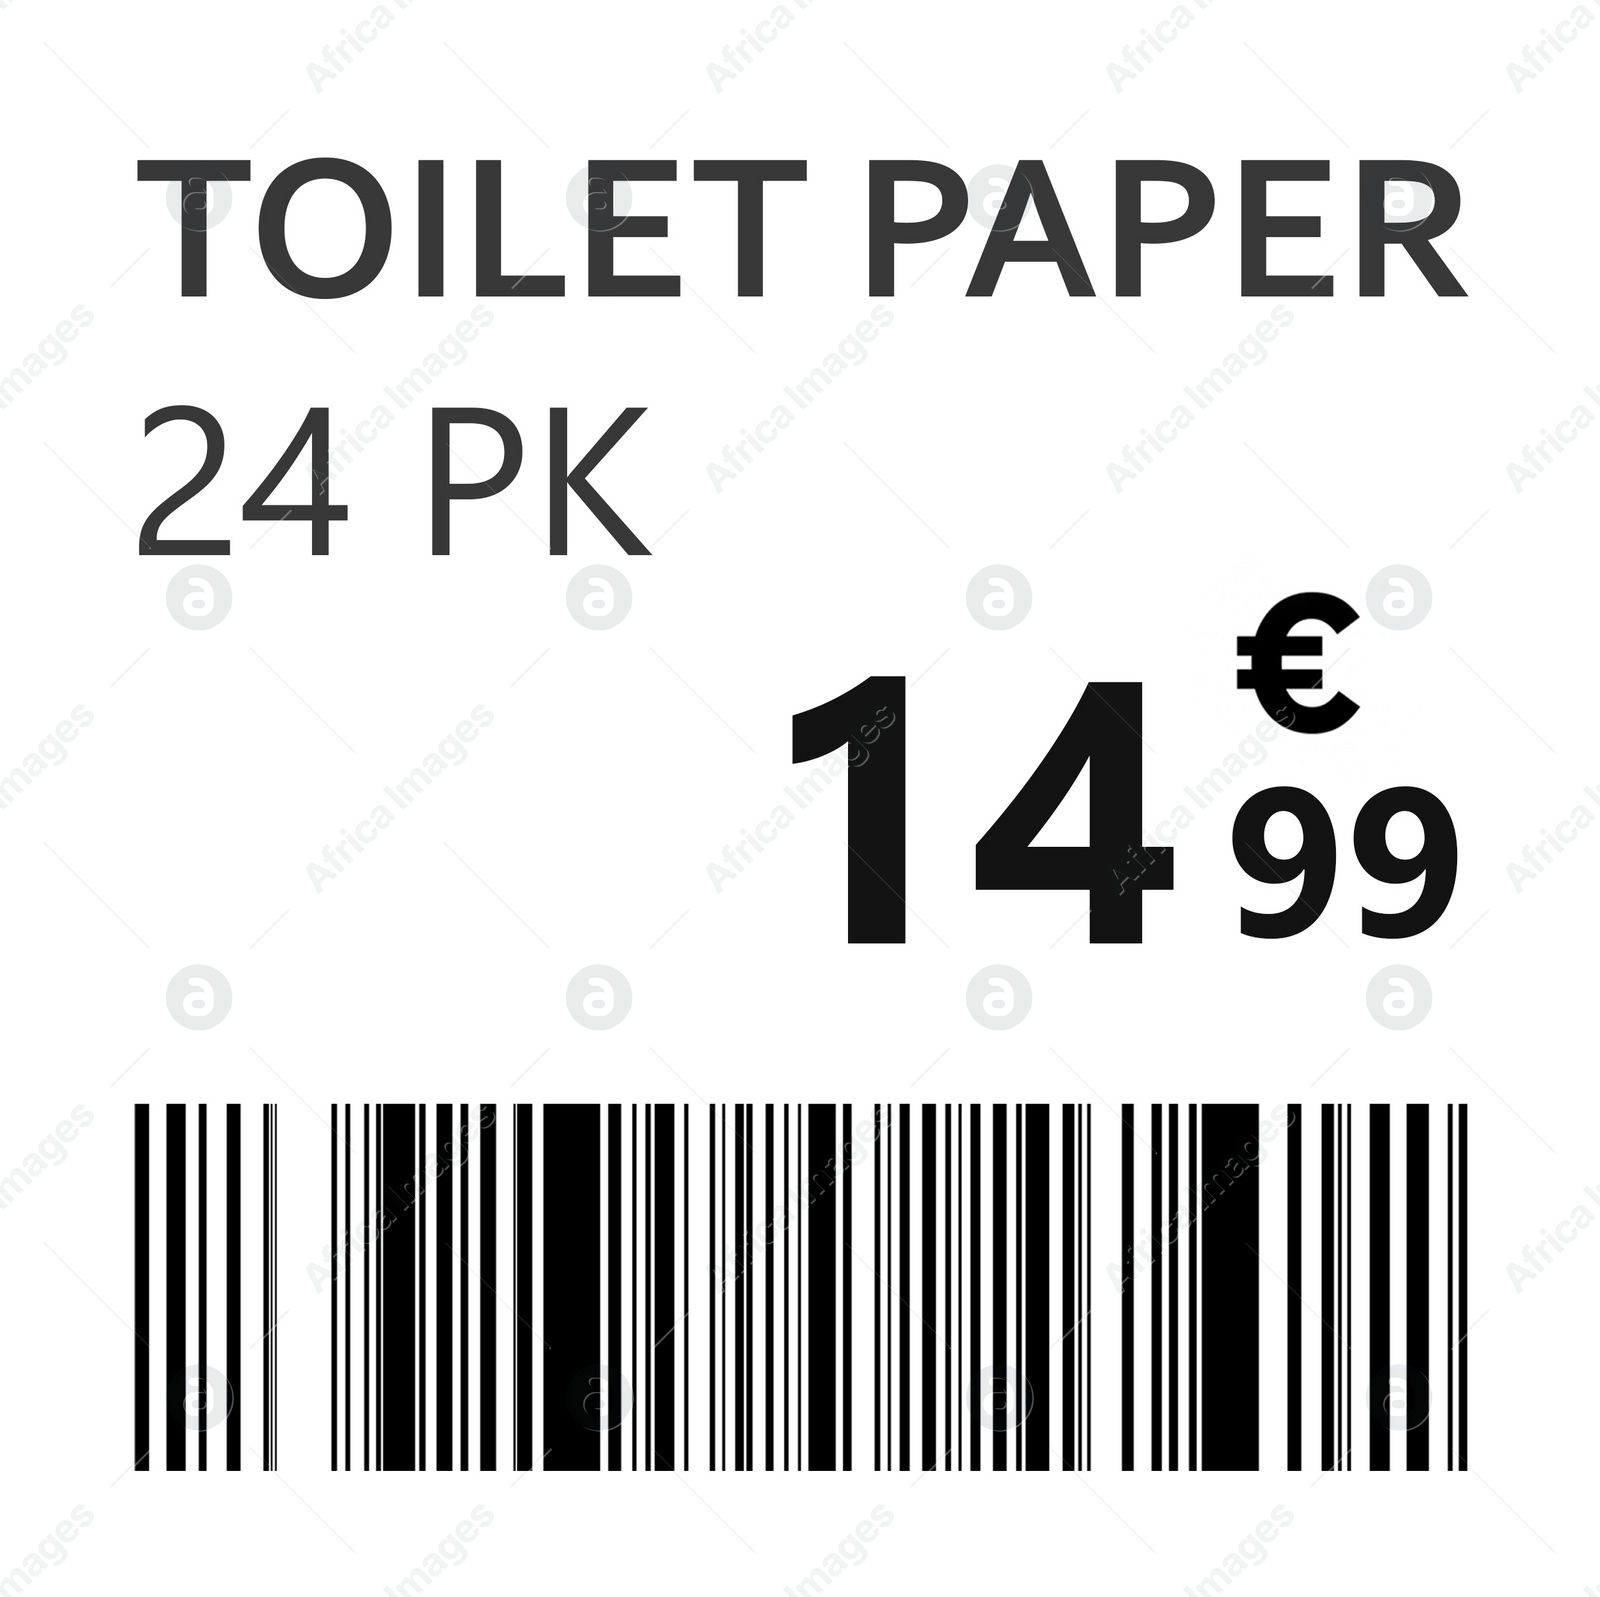 Illustration of Toilet paper price tag with barcode, illustration